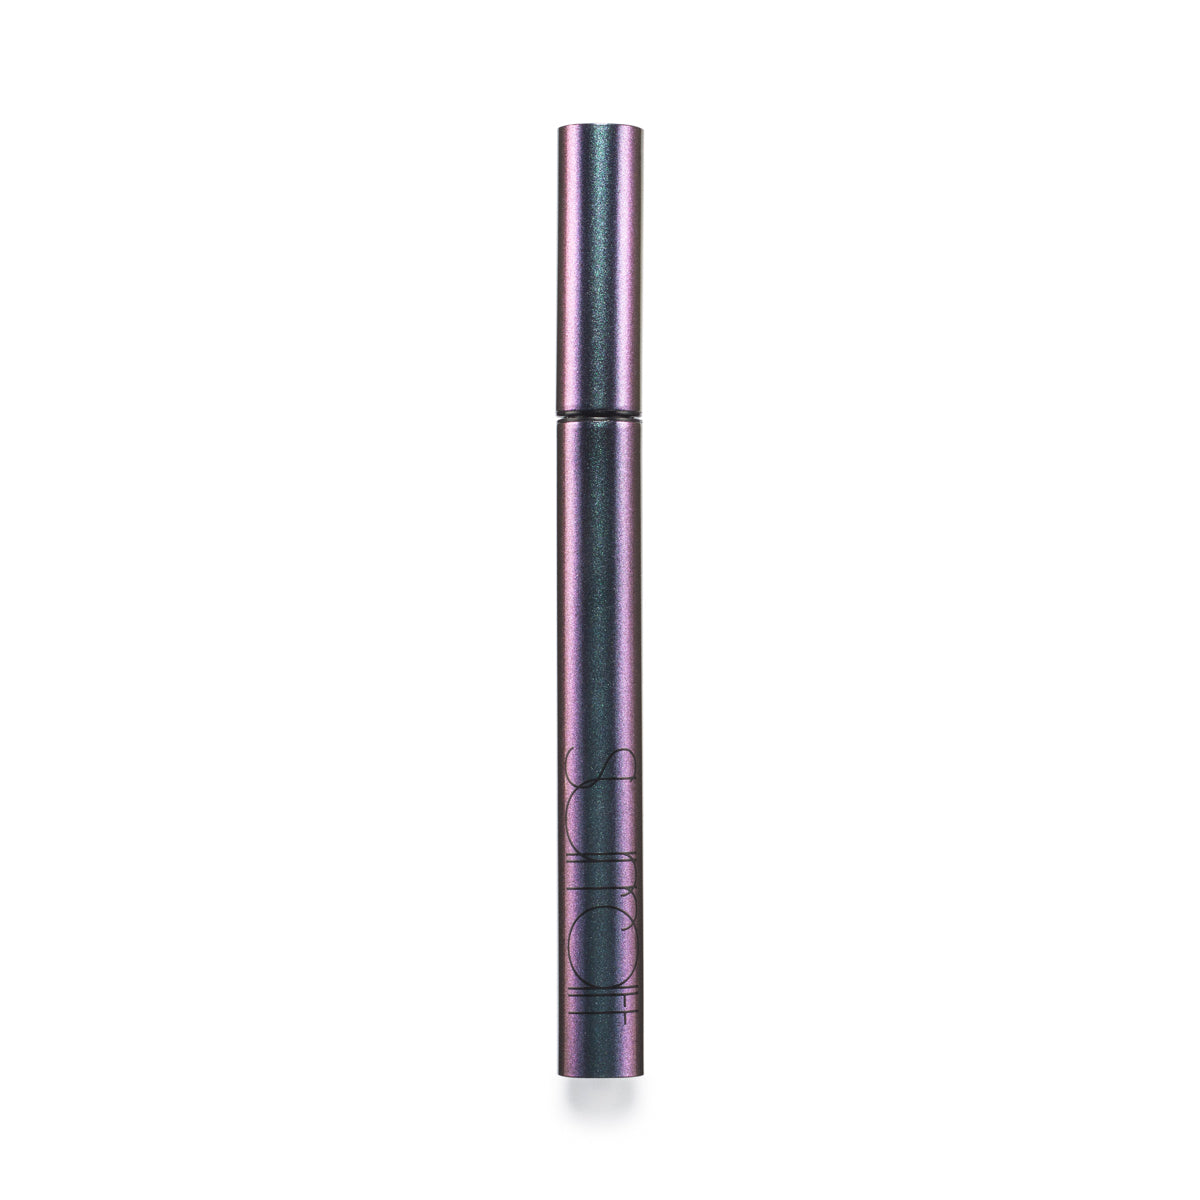 Noir Lash Tint is fast-drying, long-wearing, water-resistant